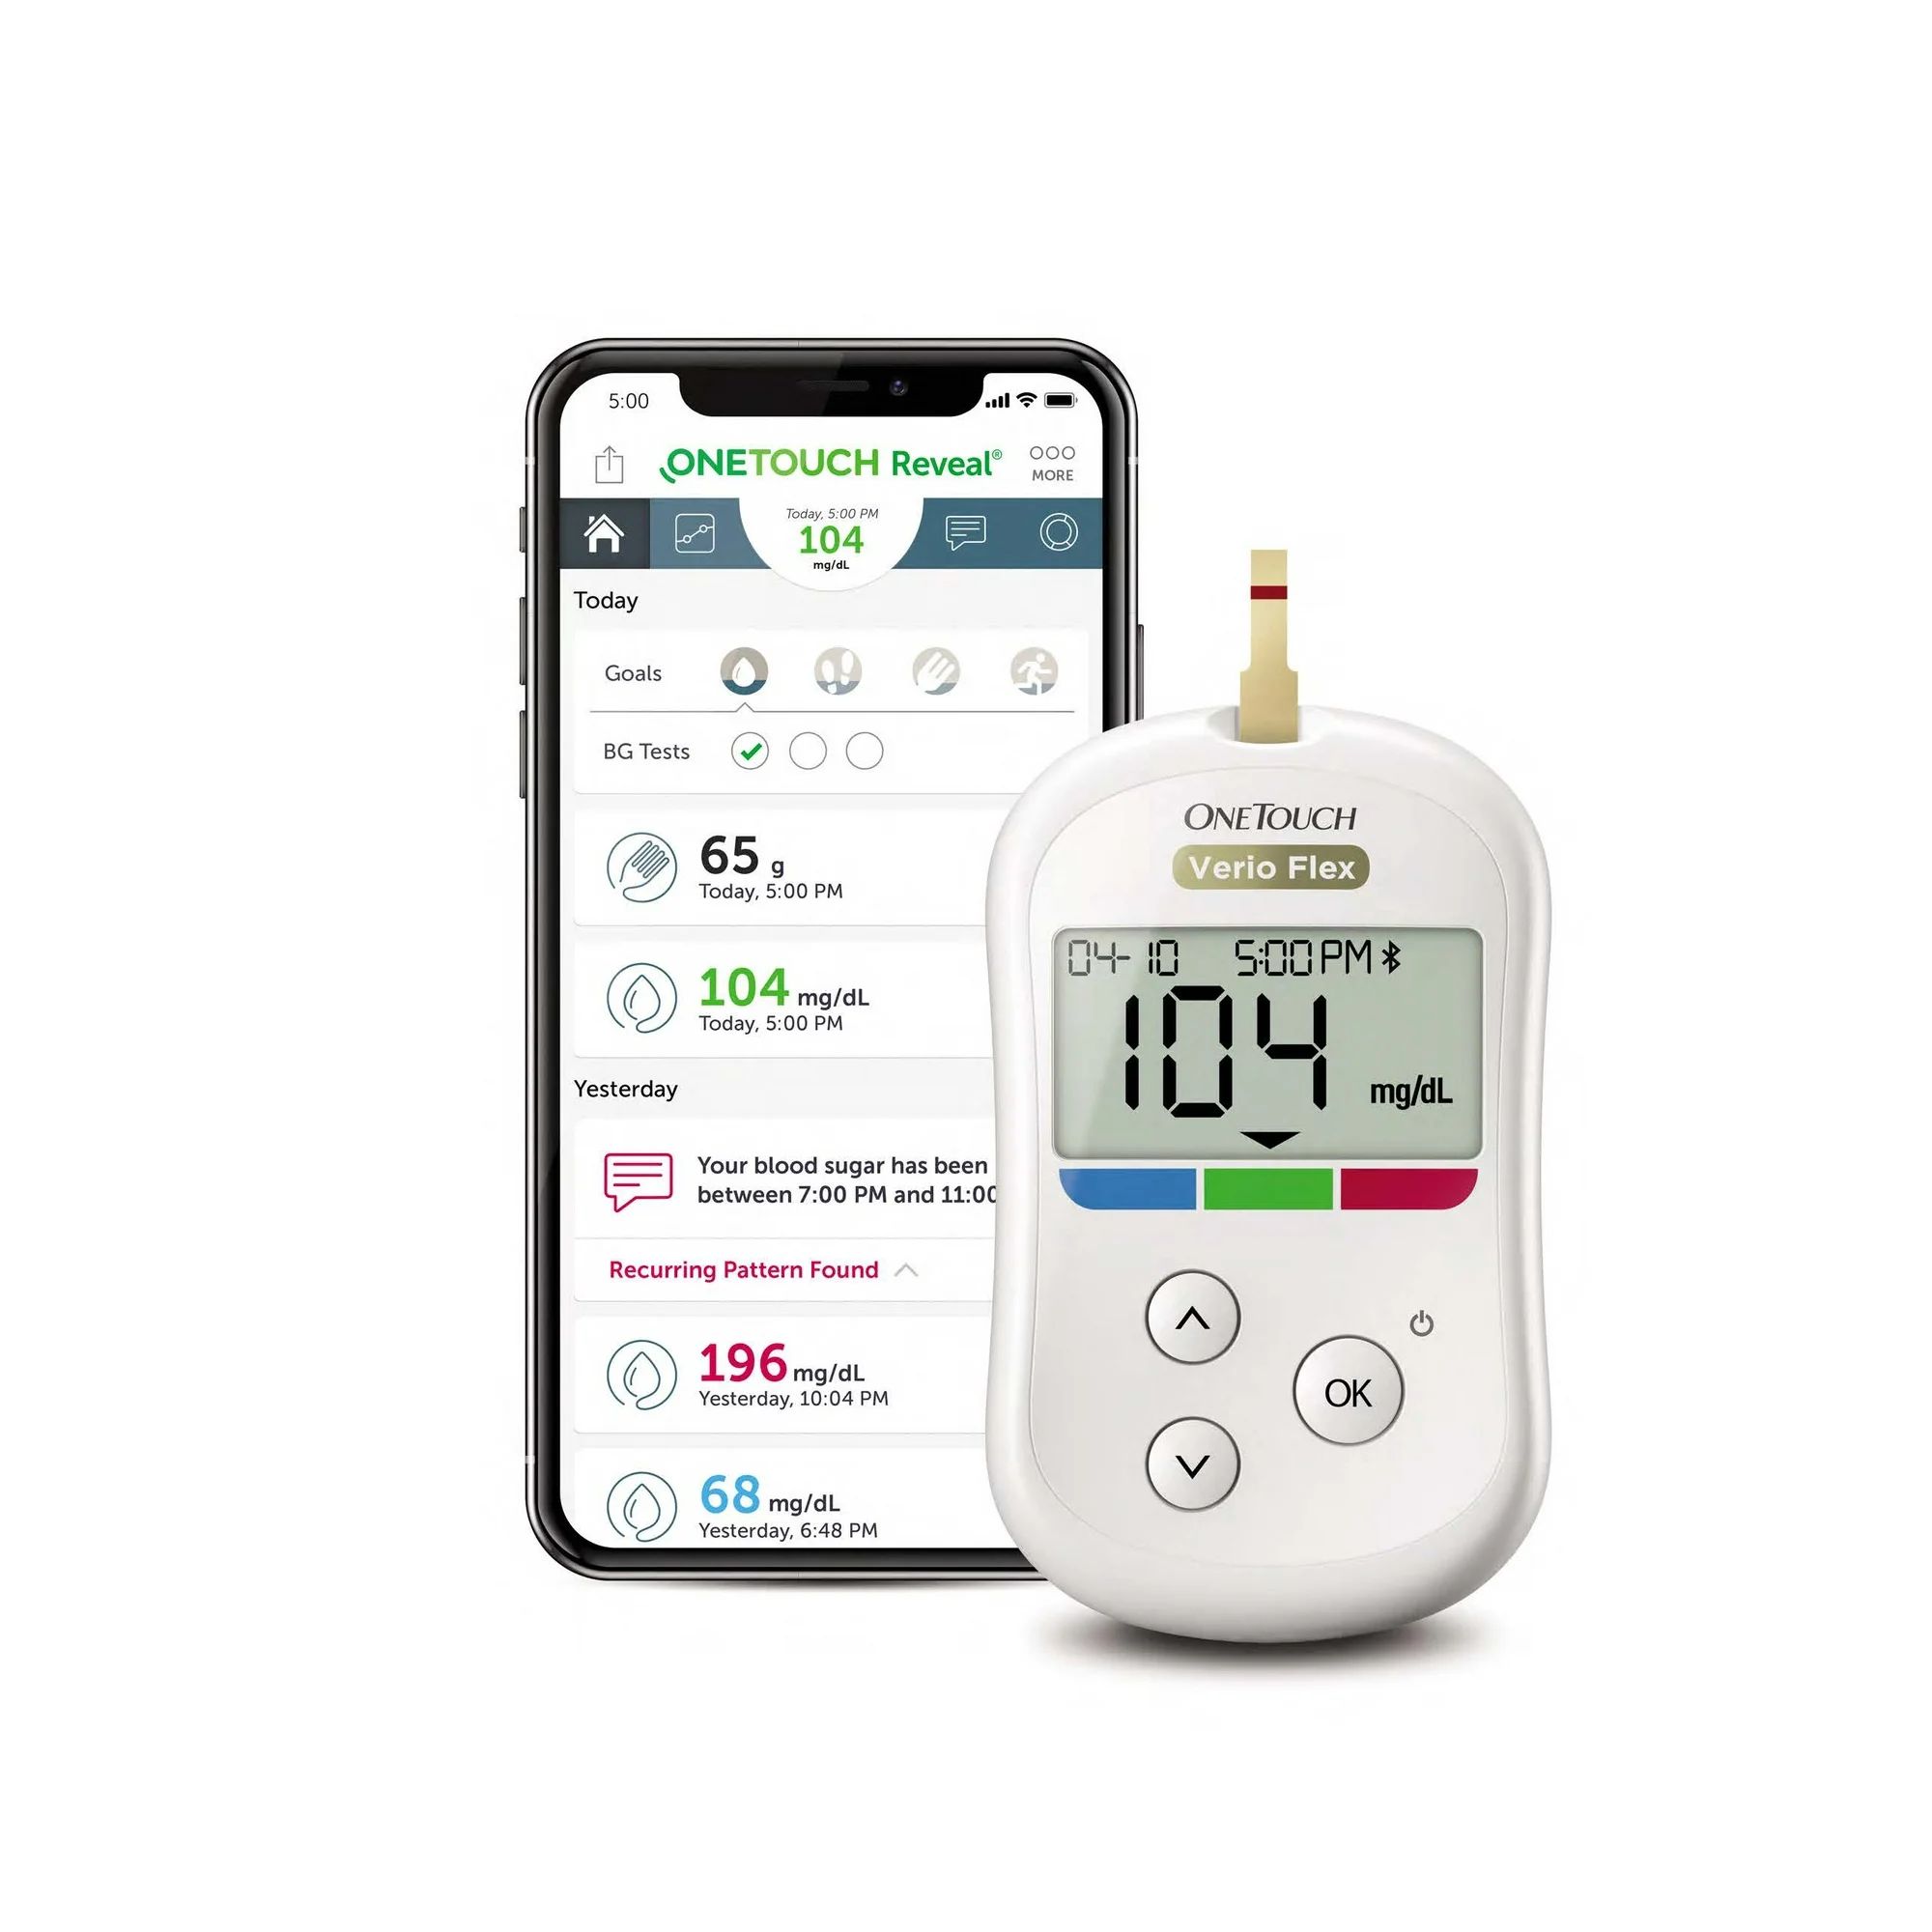 OneTouch Verio Reflect Blood Glucose Monitoring System